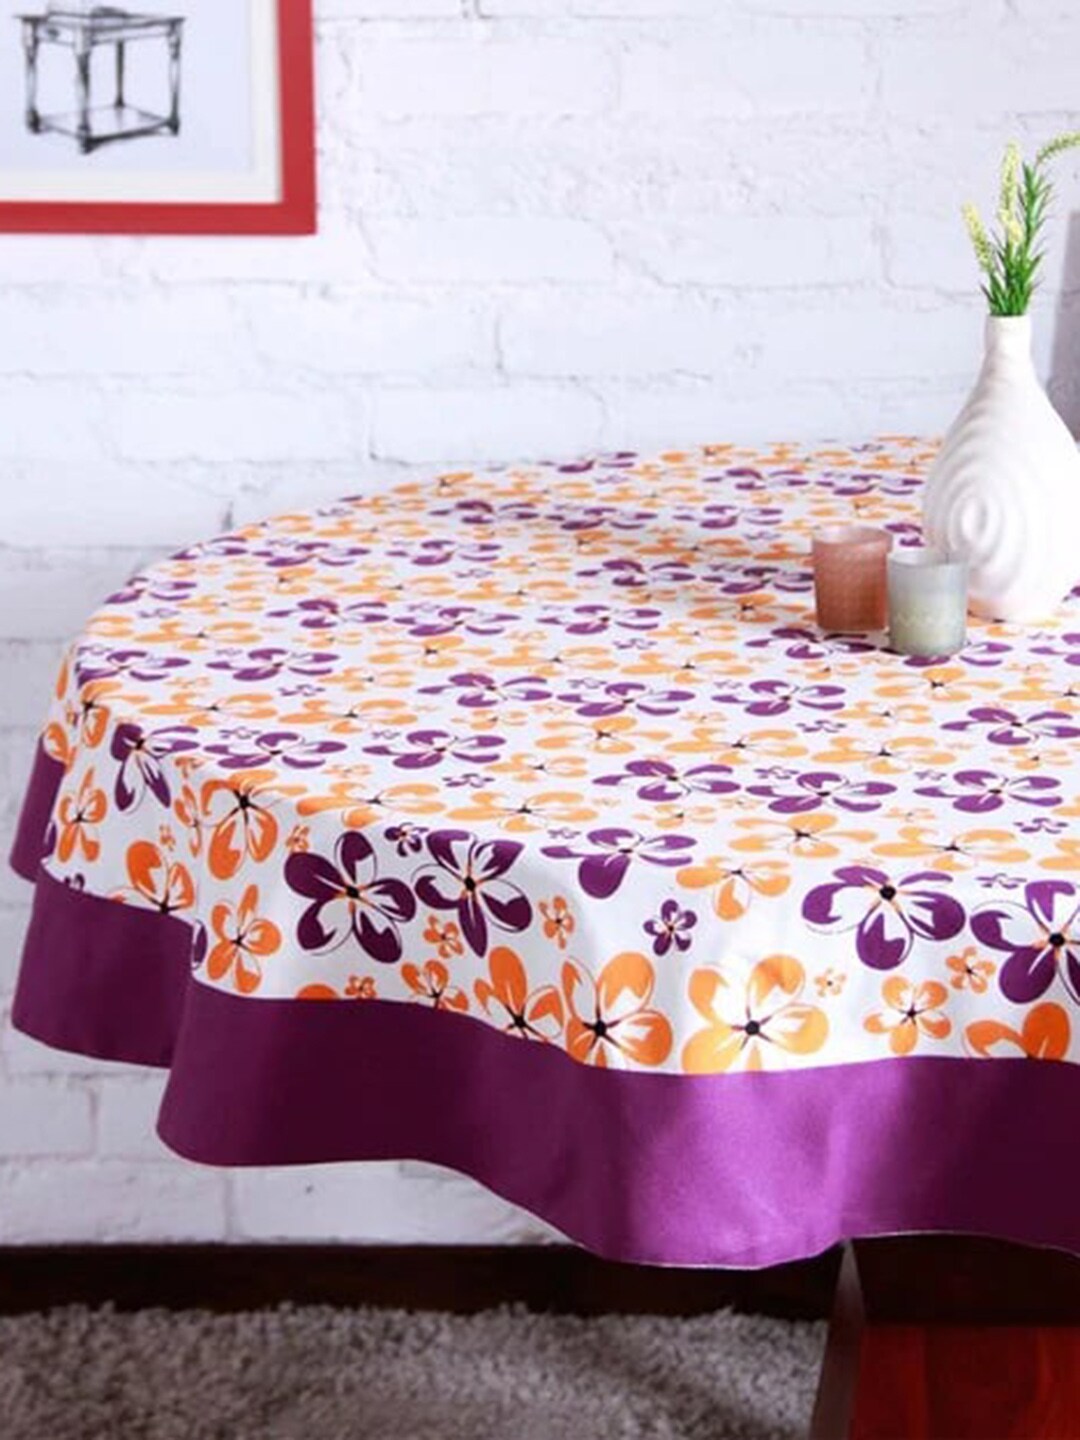 Lushomes Purple & Orange 6 Seater Printed Round Table Cloth Price in India